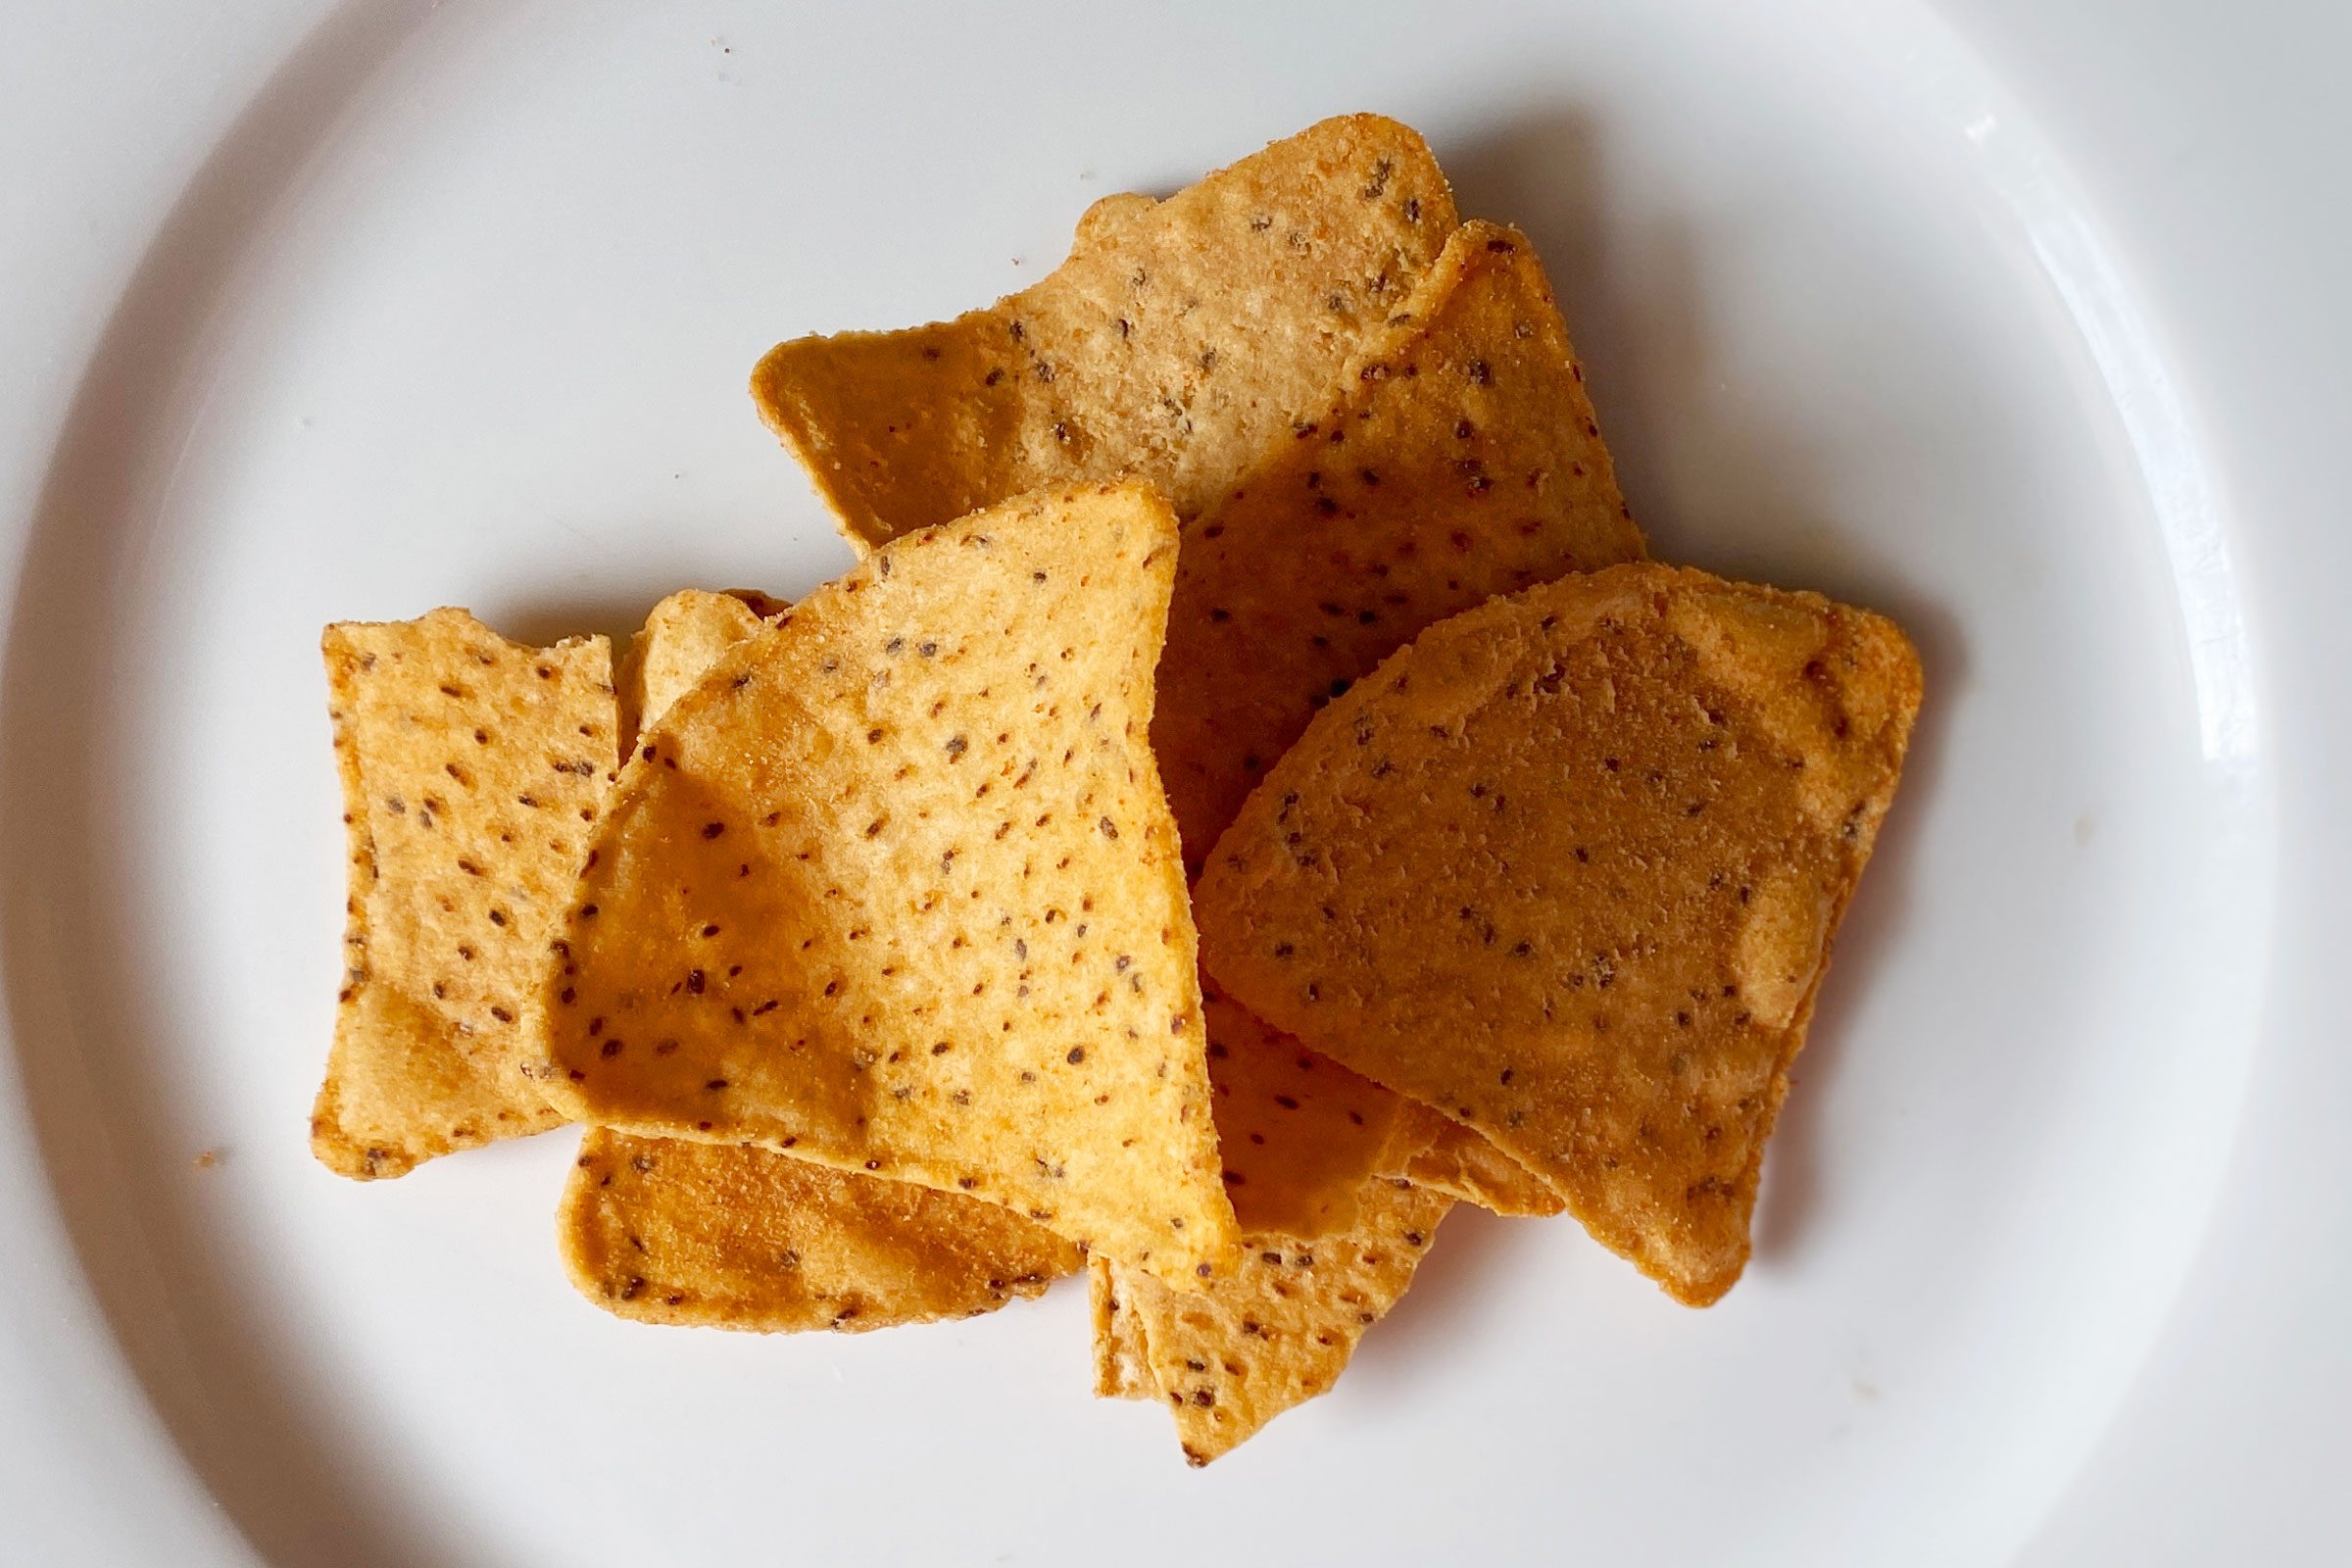 Off-Brand Doritos Taste Test: Which Ones Compare to the Real Deal?